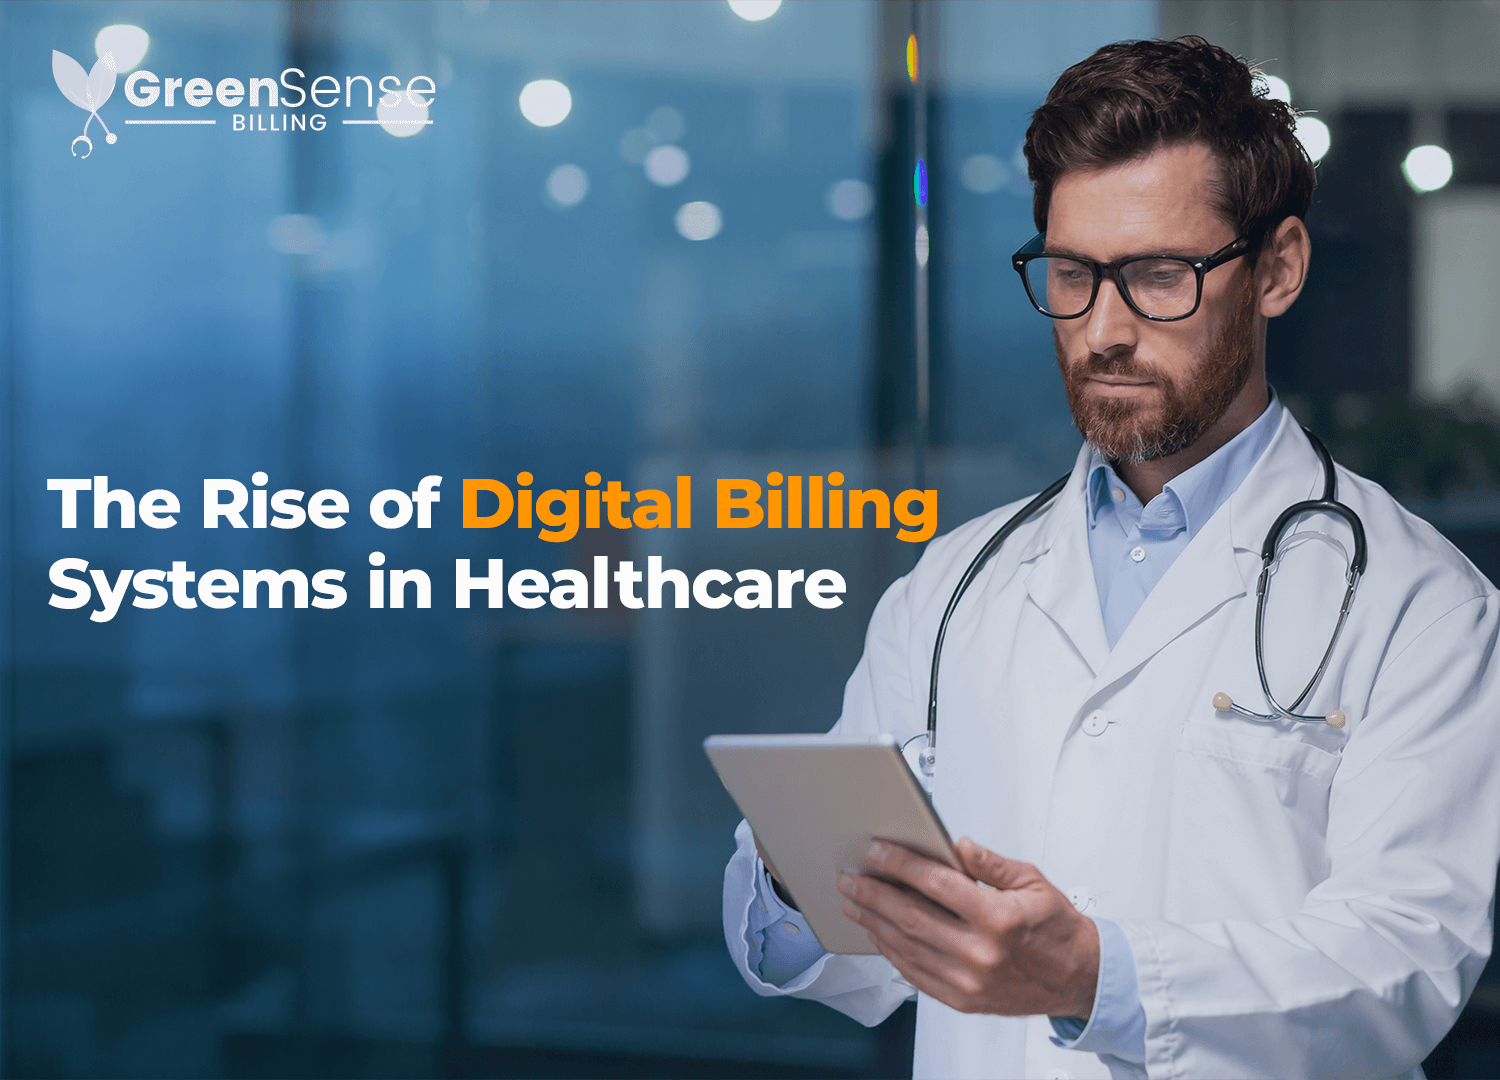 The rise of digital billing systems in healthcare